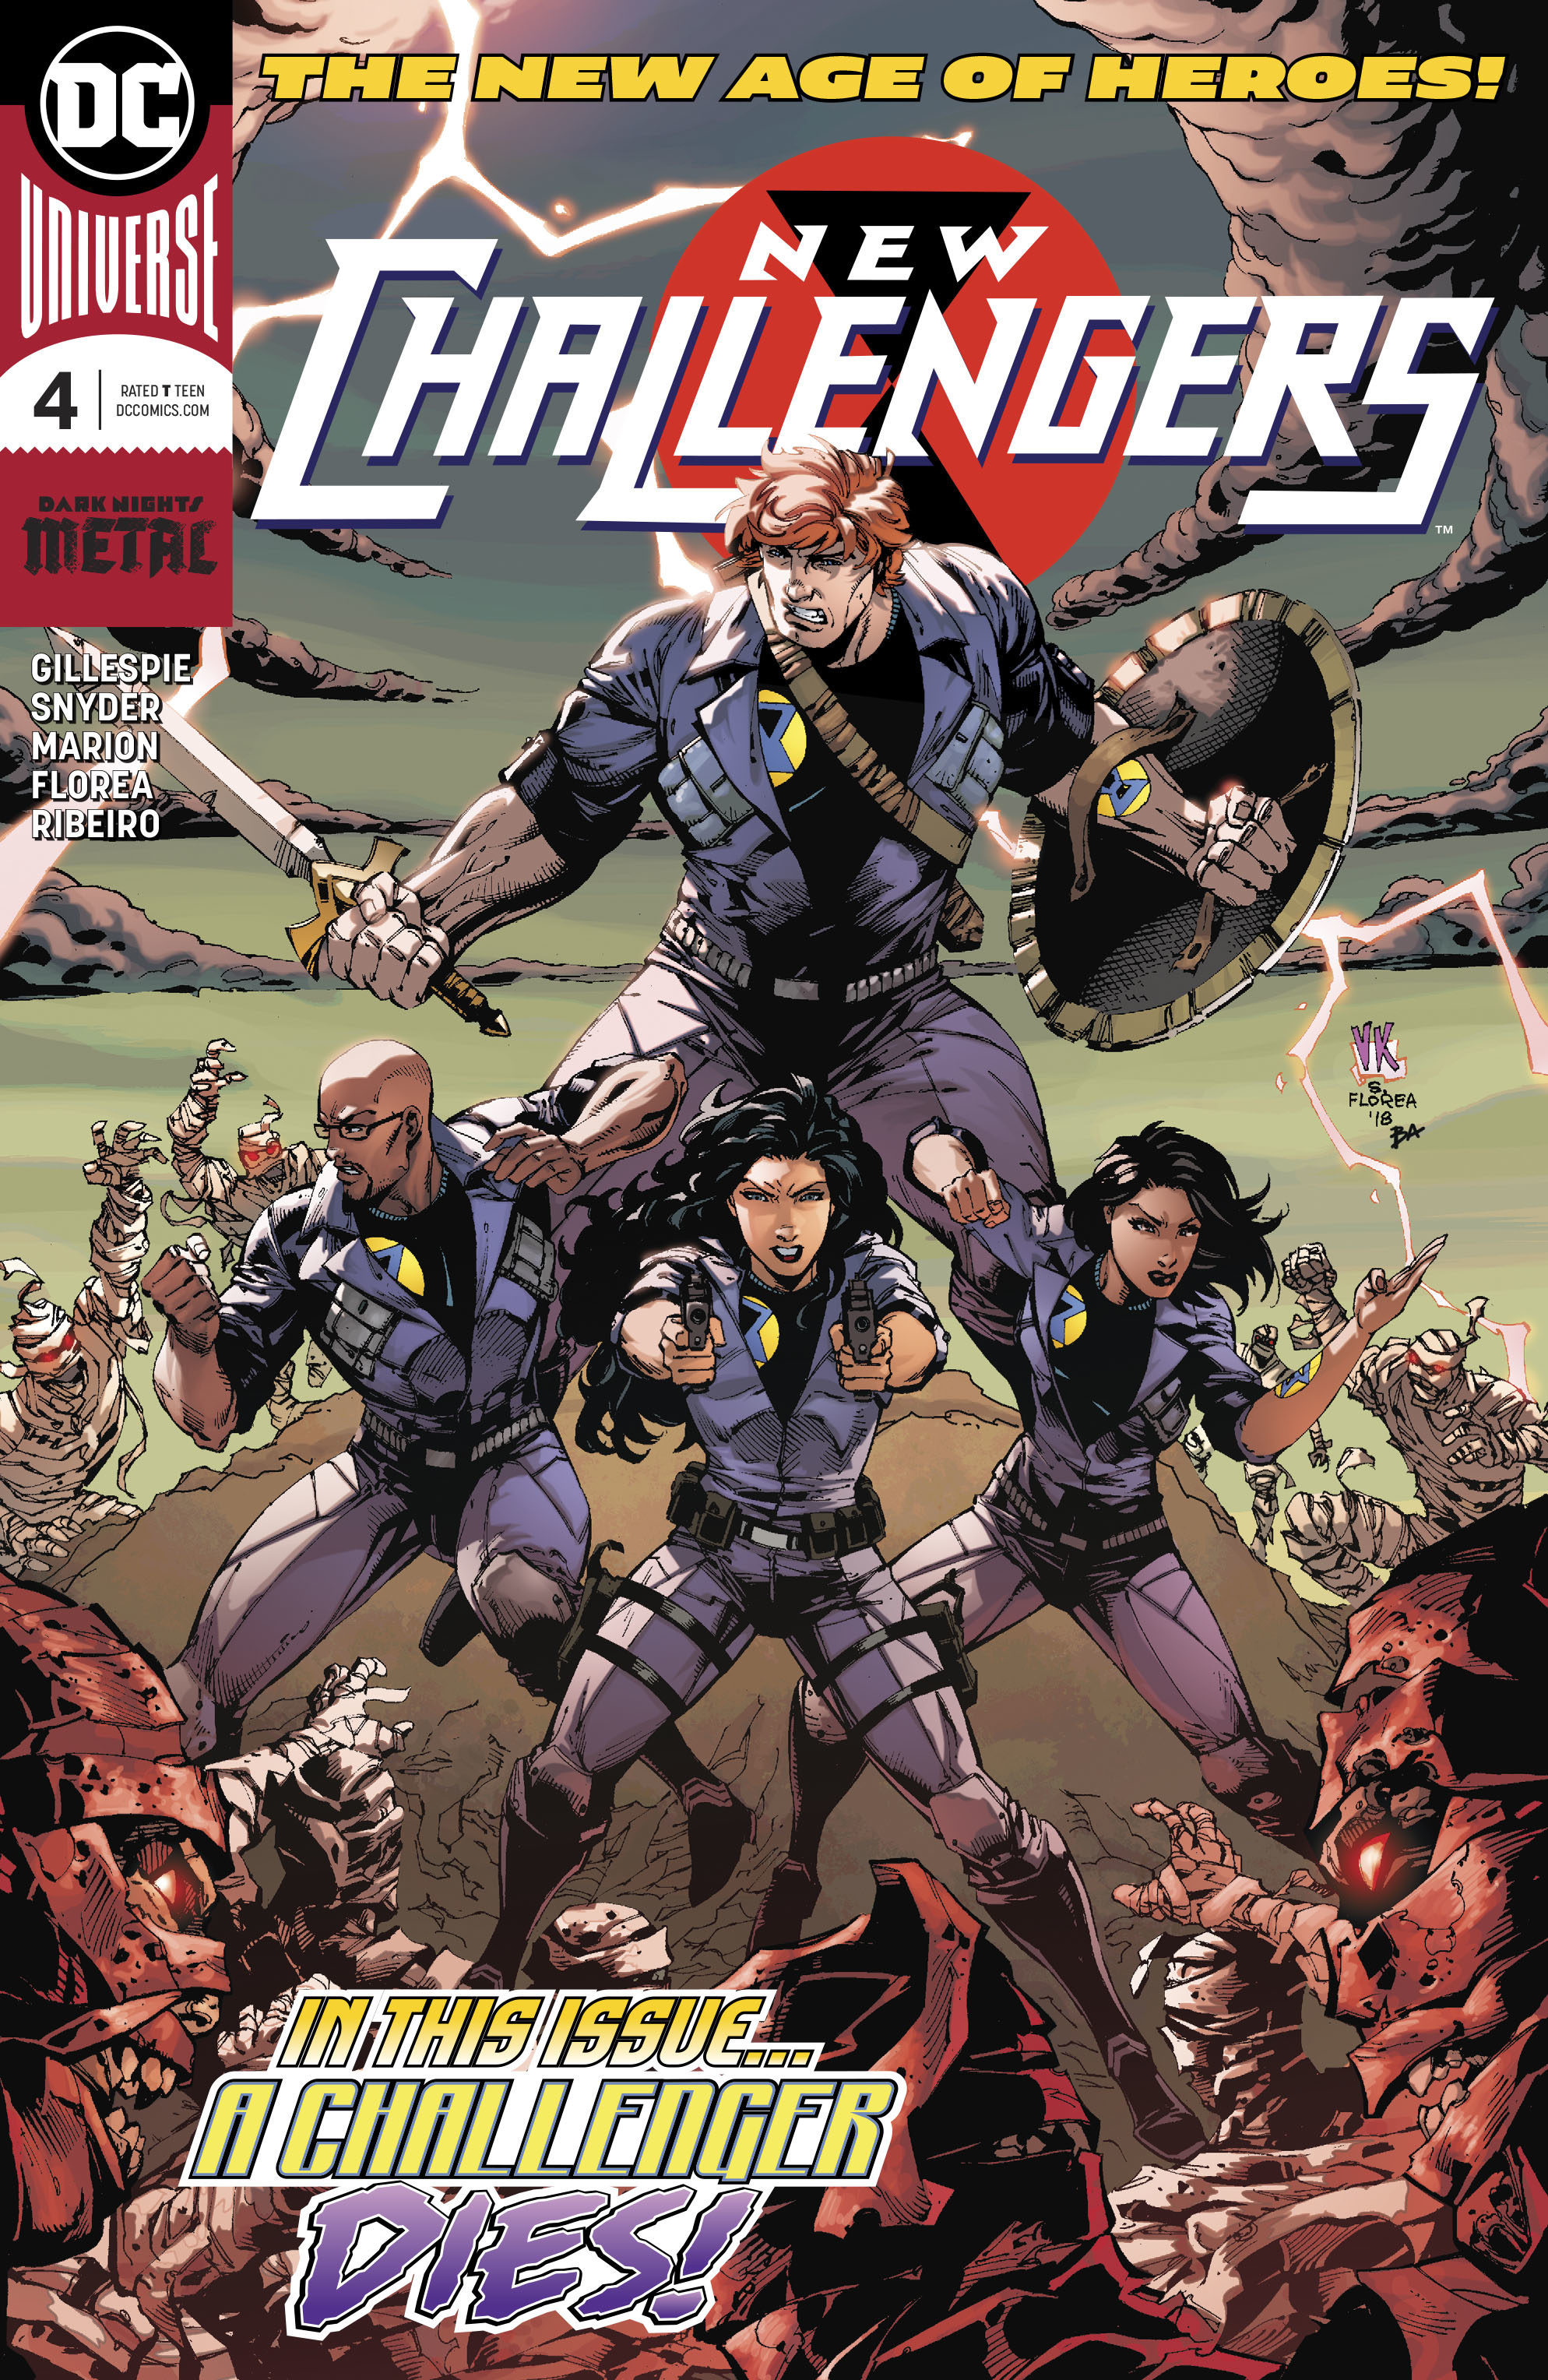 NEW CHALLENGERS #4 (OF 6)